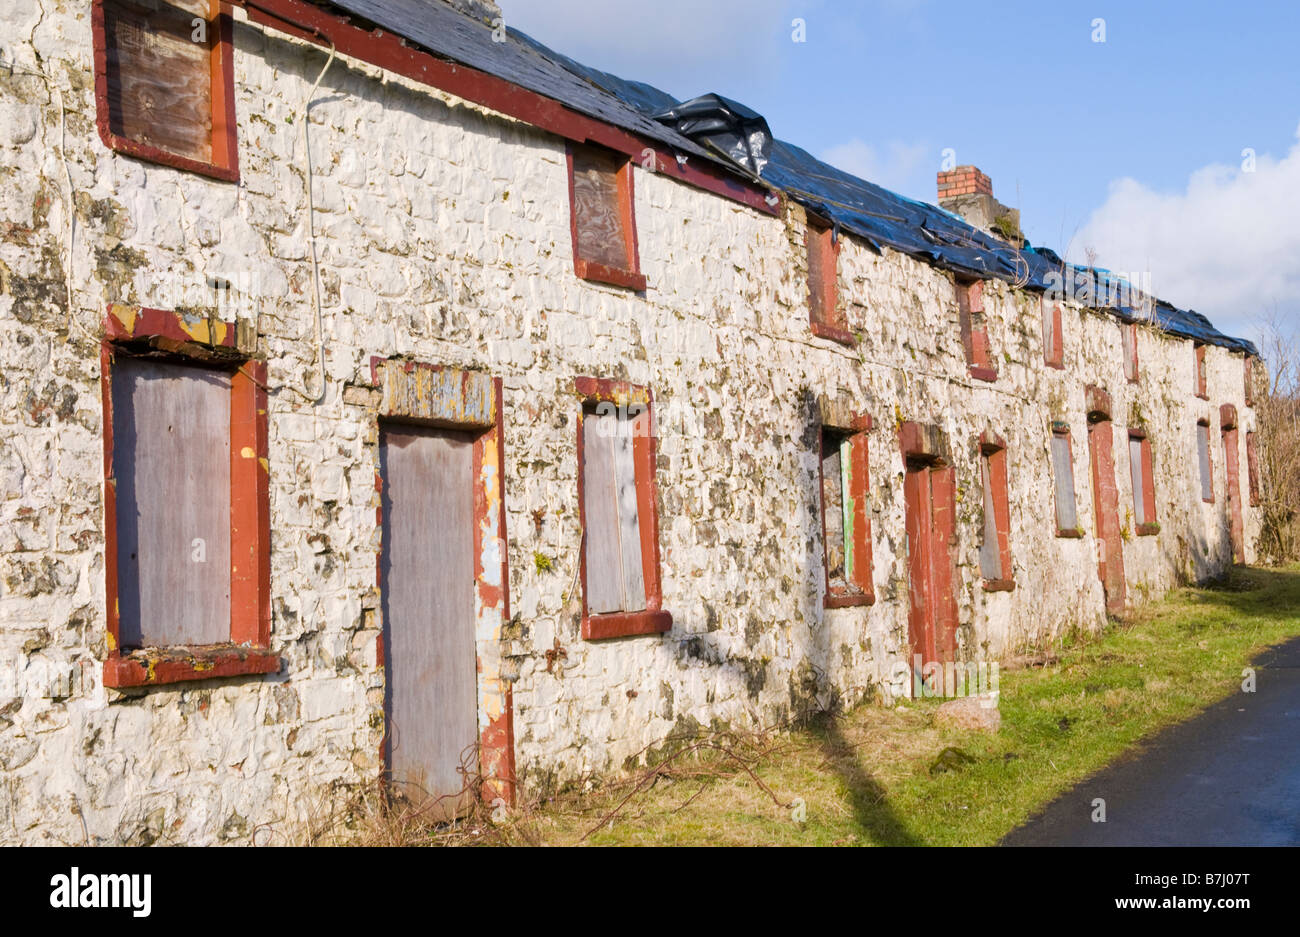 Boarded Up Derelict Row Of 4 Terraced Stone Cottages For Sale By